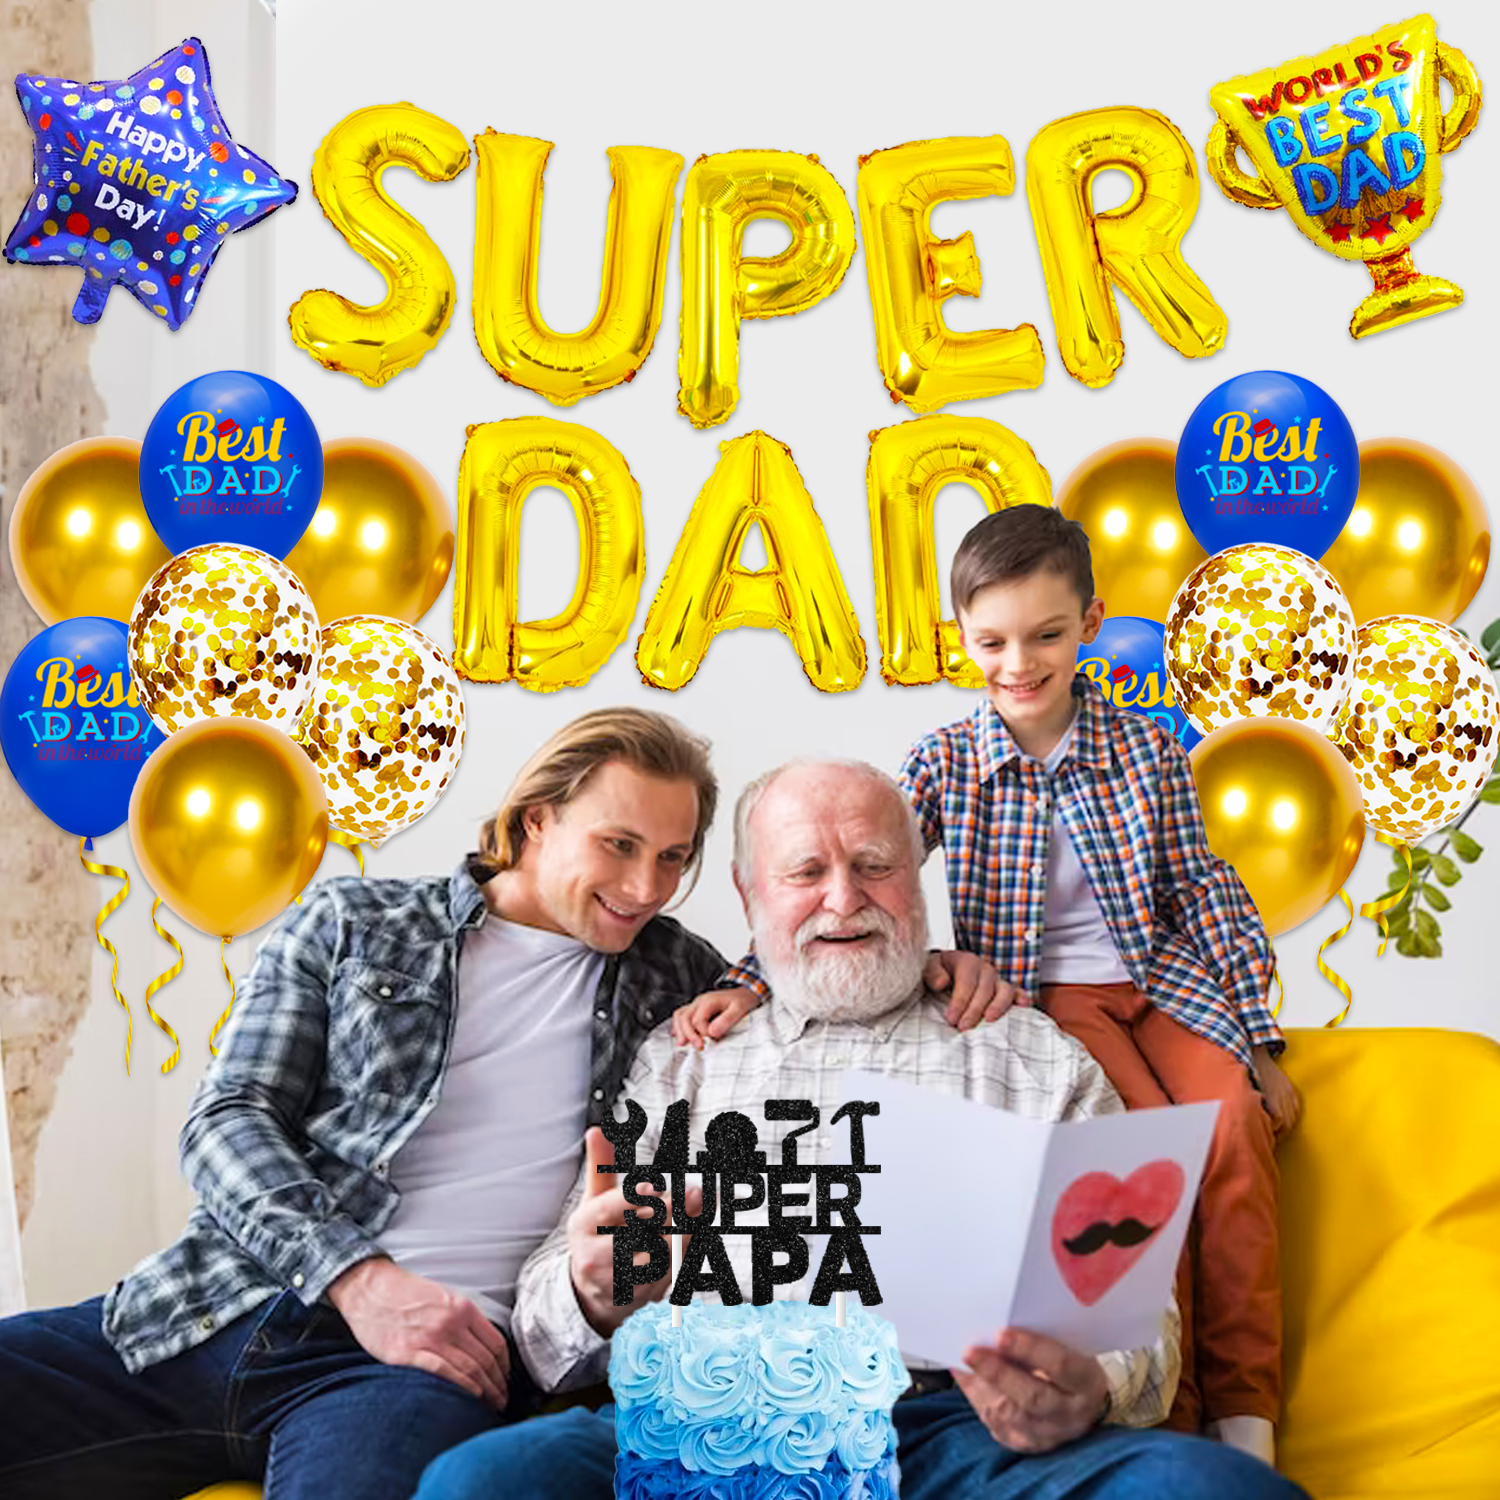 Happy Fathers Day Decorations - Super Dad Decorations for Father Birthday Party - World's Best Dad Banner and Best Dad Balloon - Super Dad Party Supplies for Home - image 3 of 6